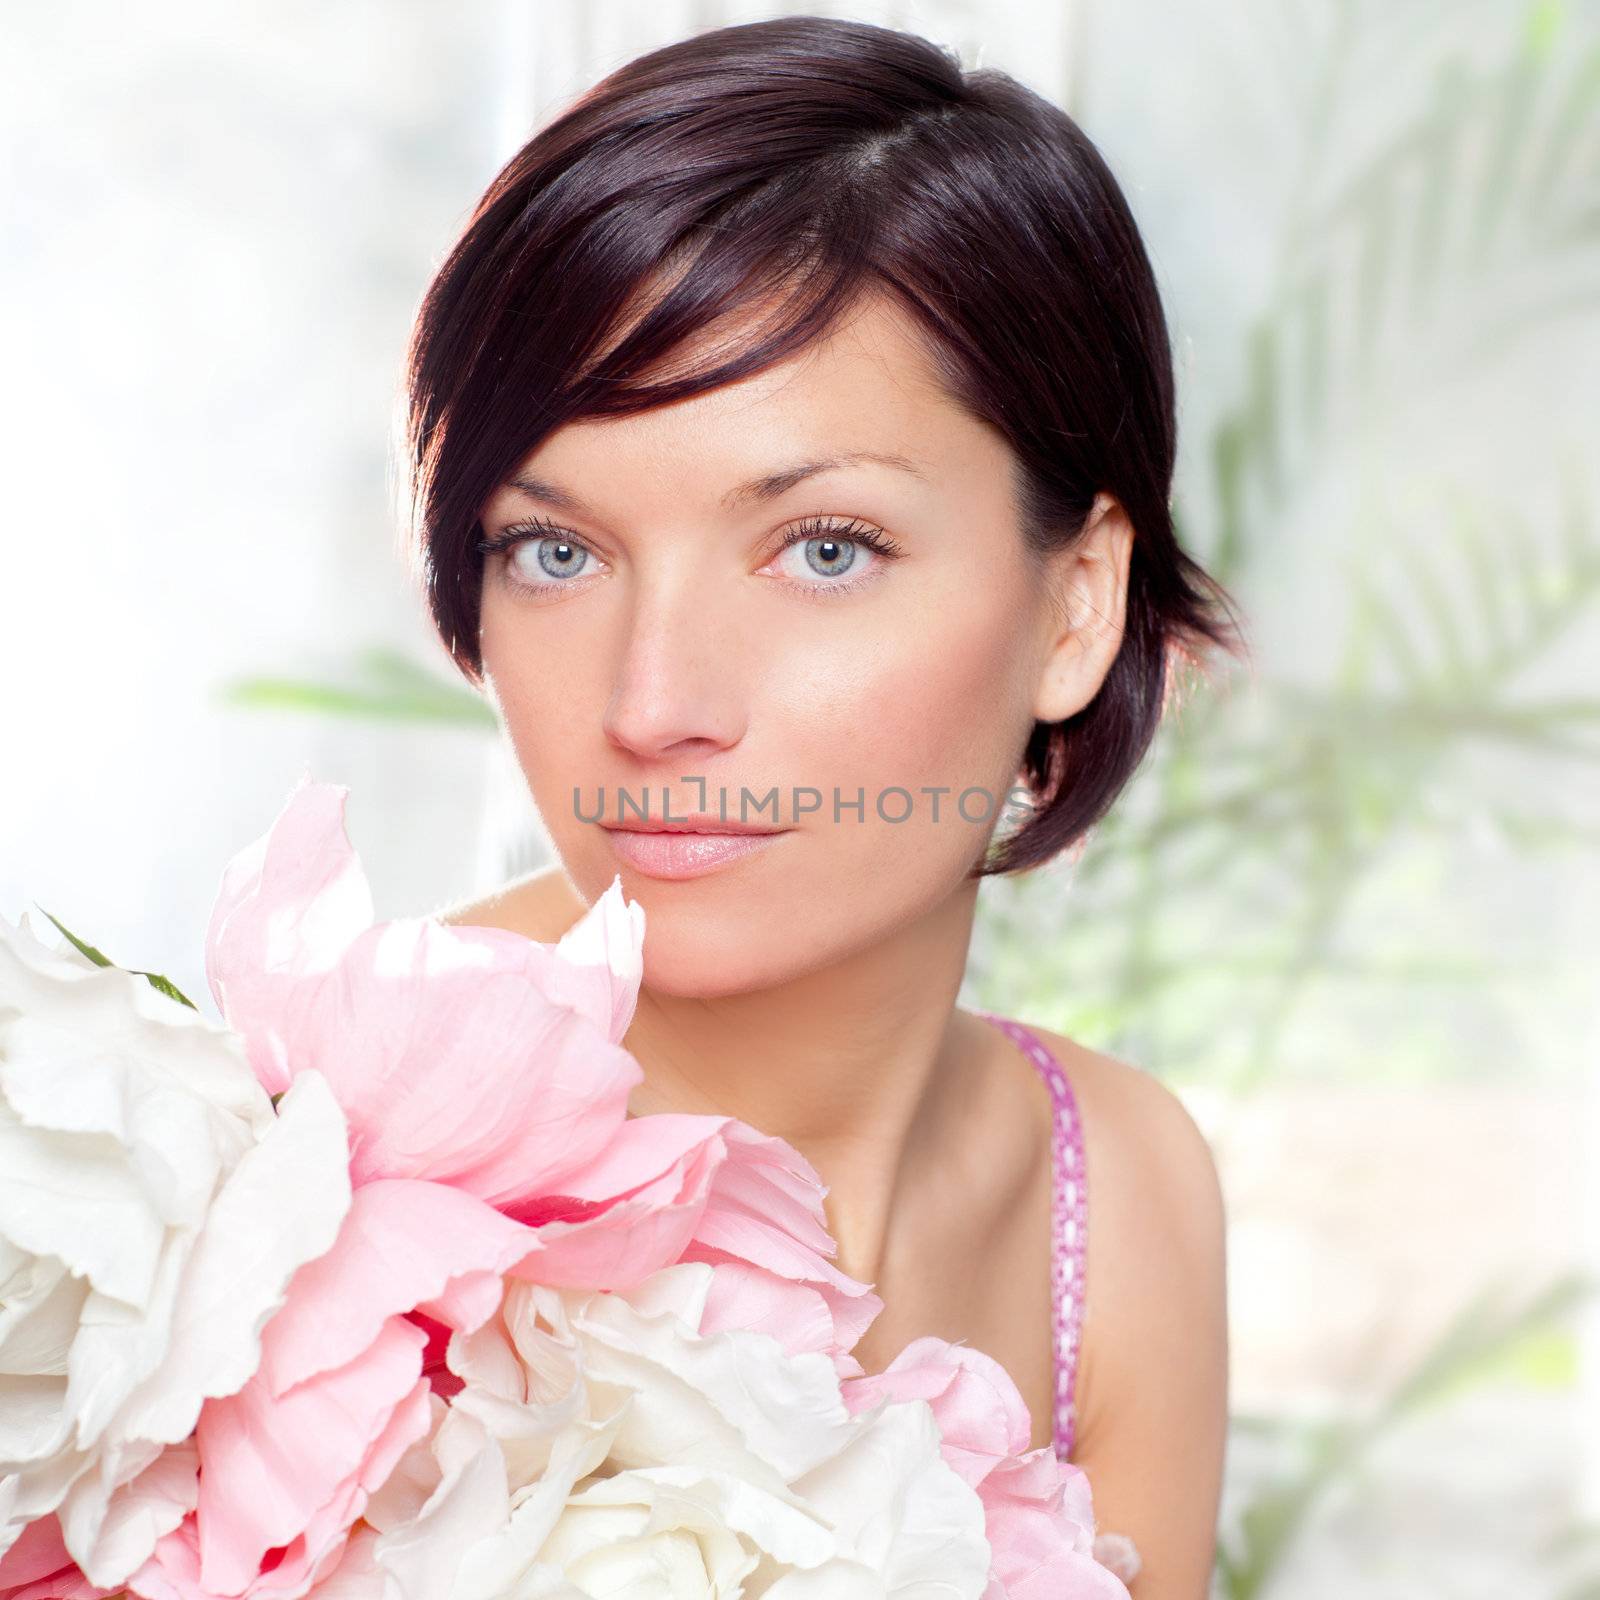 beautiful flowers woman with spring pink dress portrait